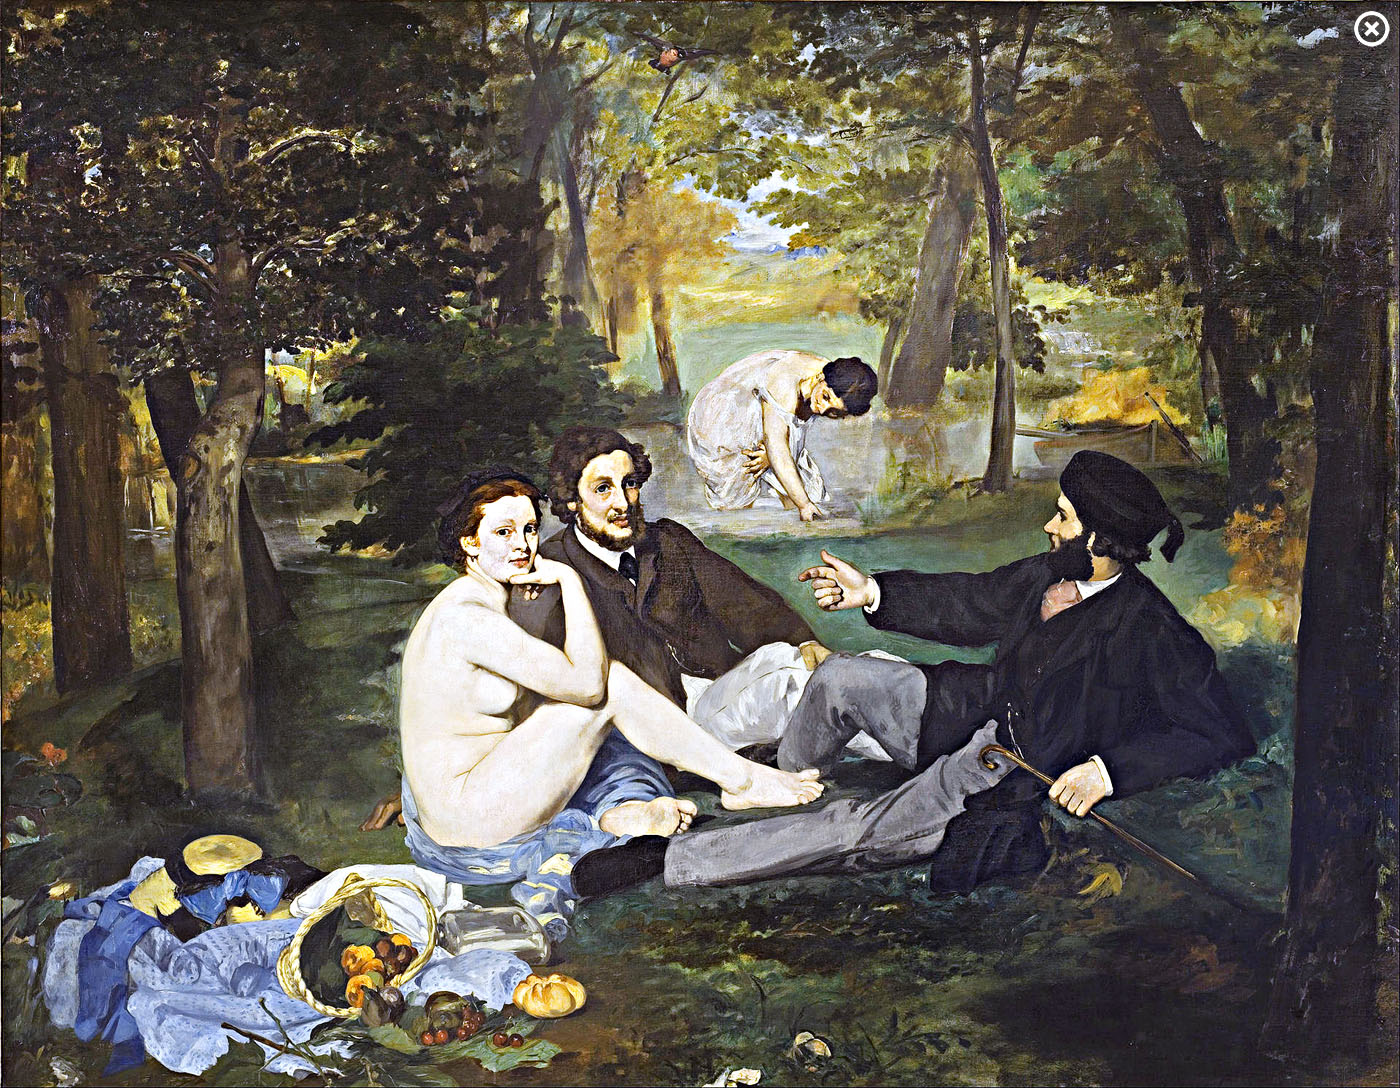 Manet's - Luncheon in the Grass